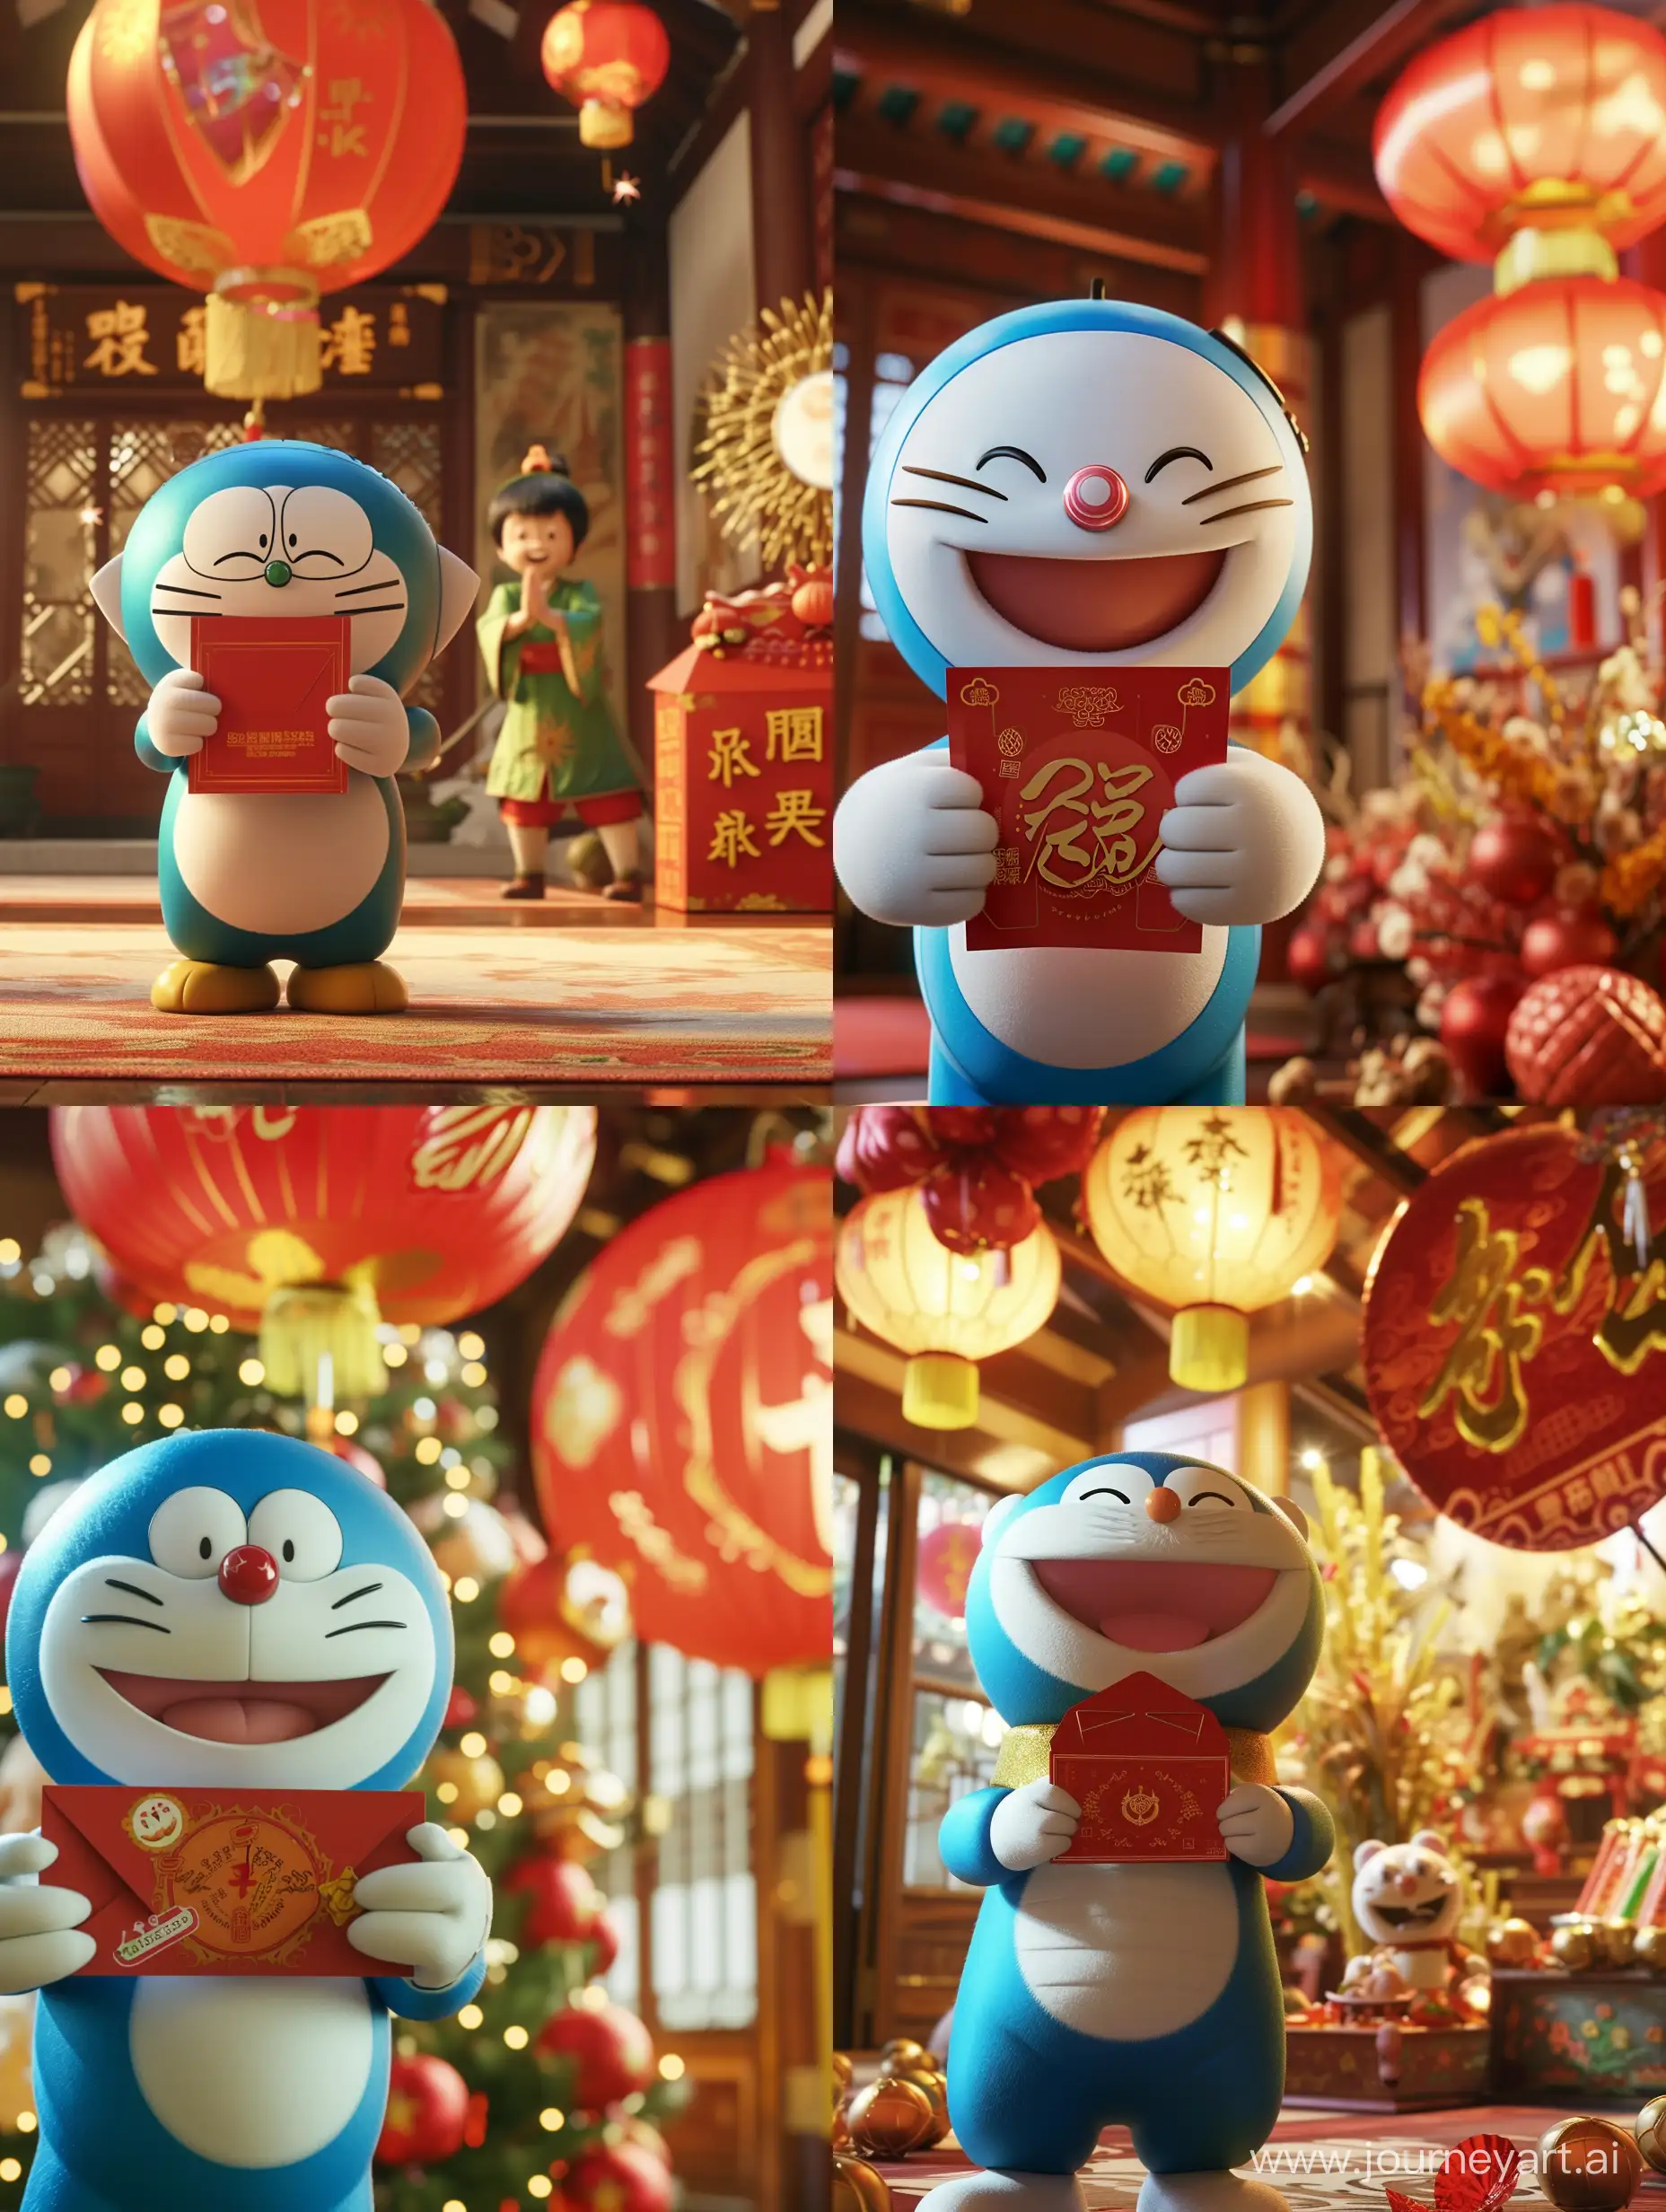 Doraemon-Celebrates-Chinese-New-Year-with-a-Red-Envelope